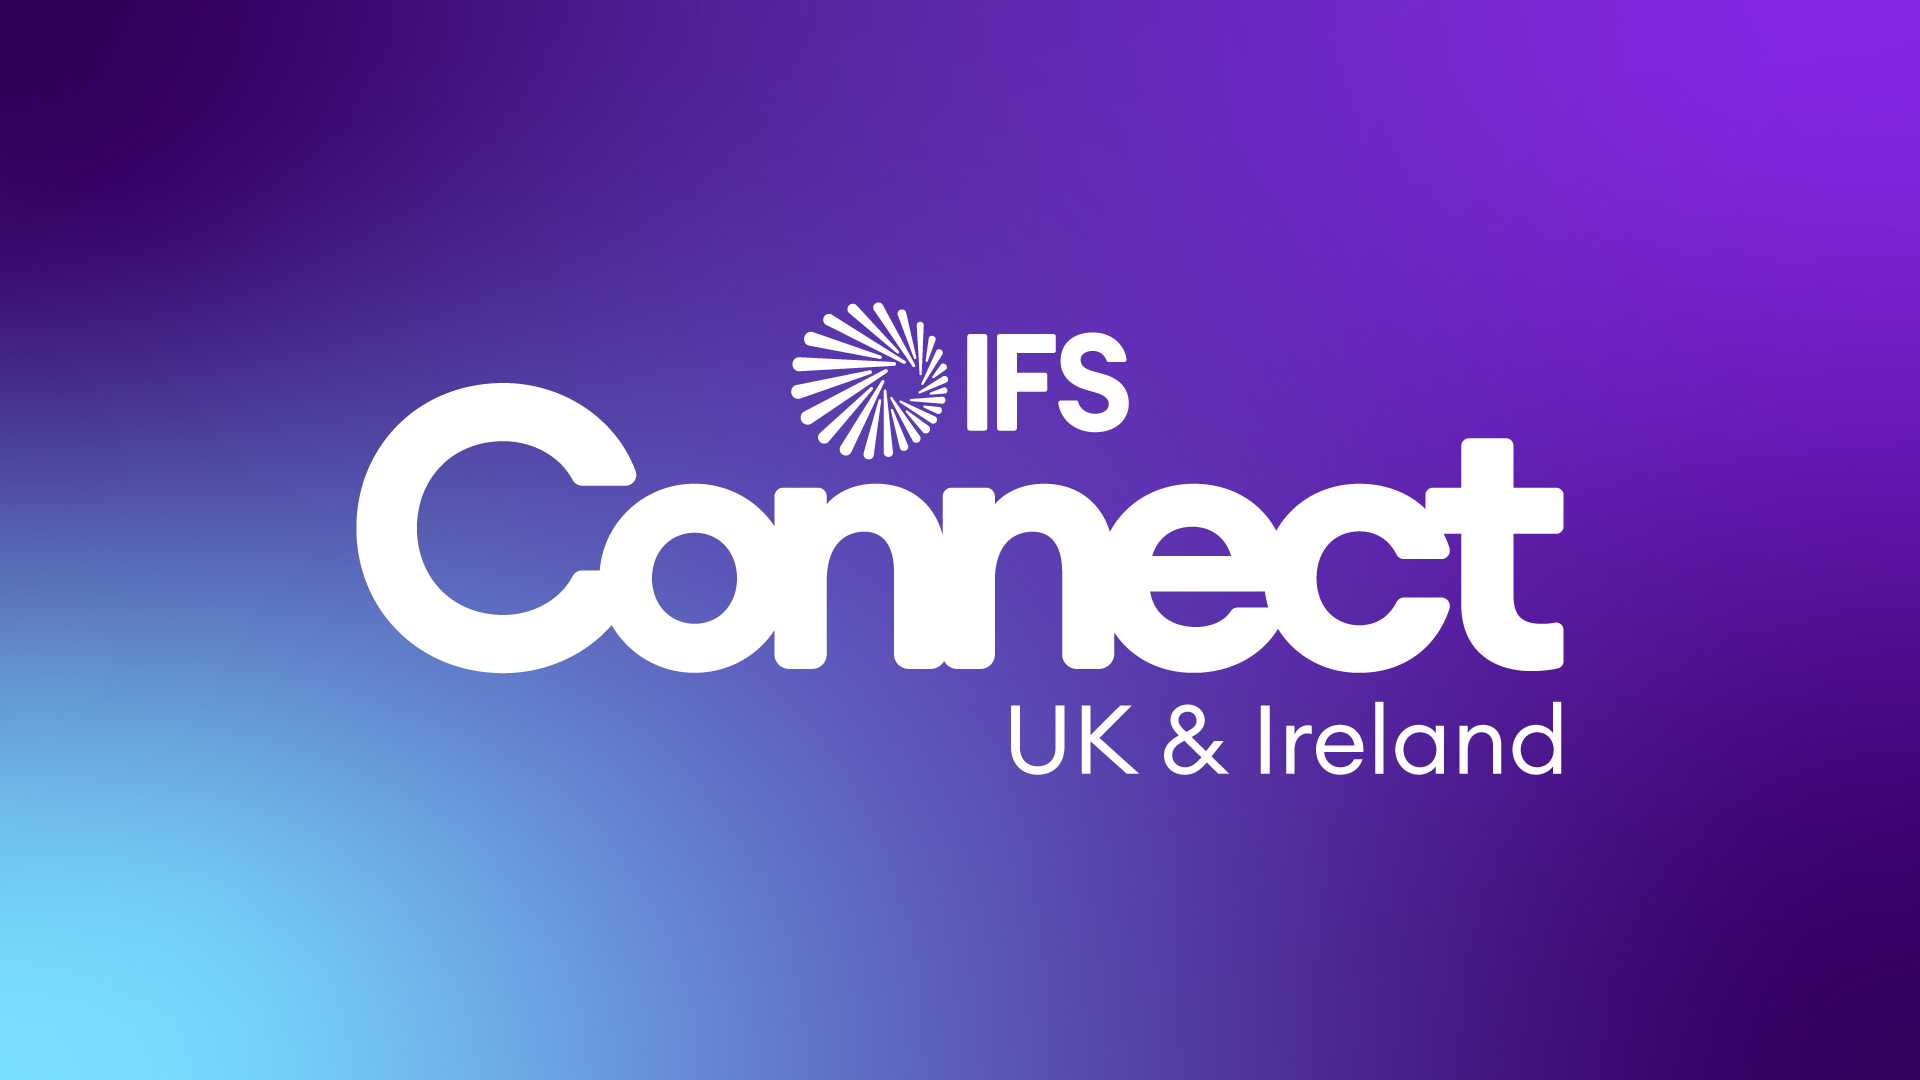 Book to attend IFS Connect now... IFS UK&I User Group